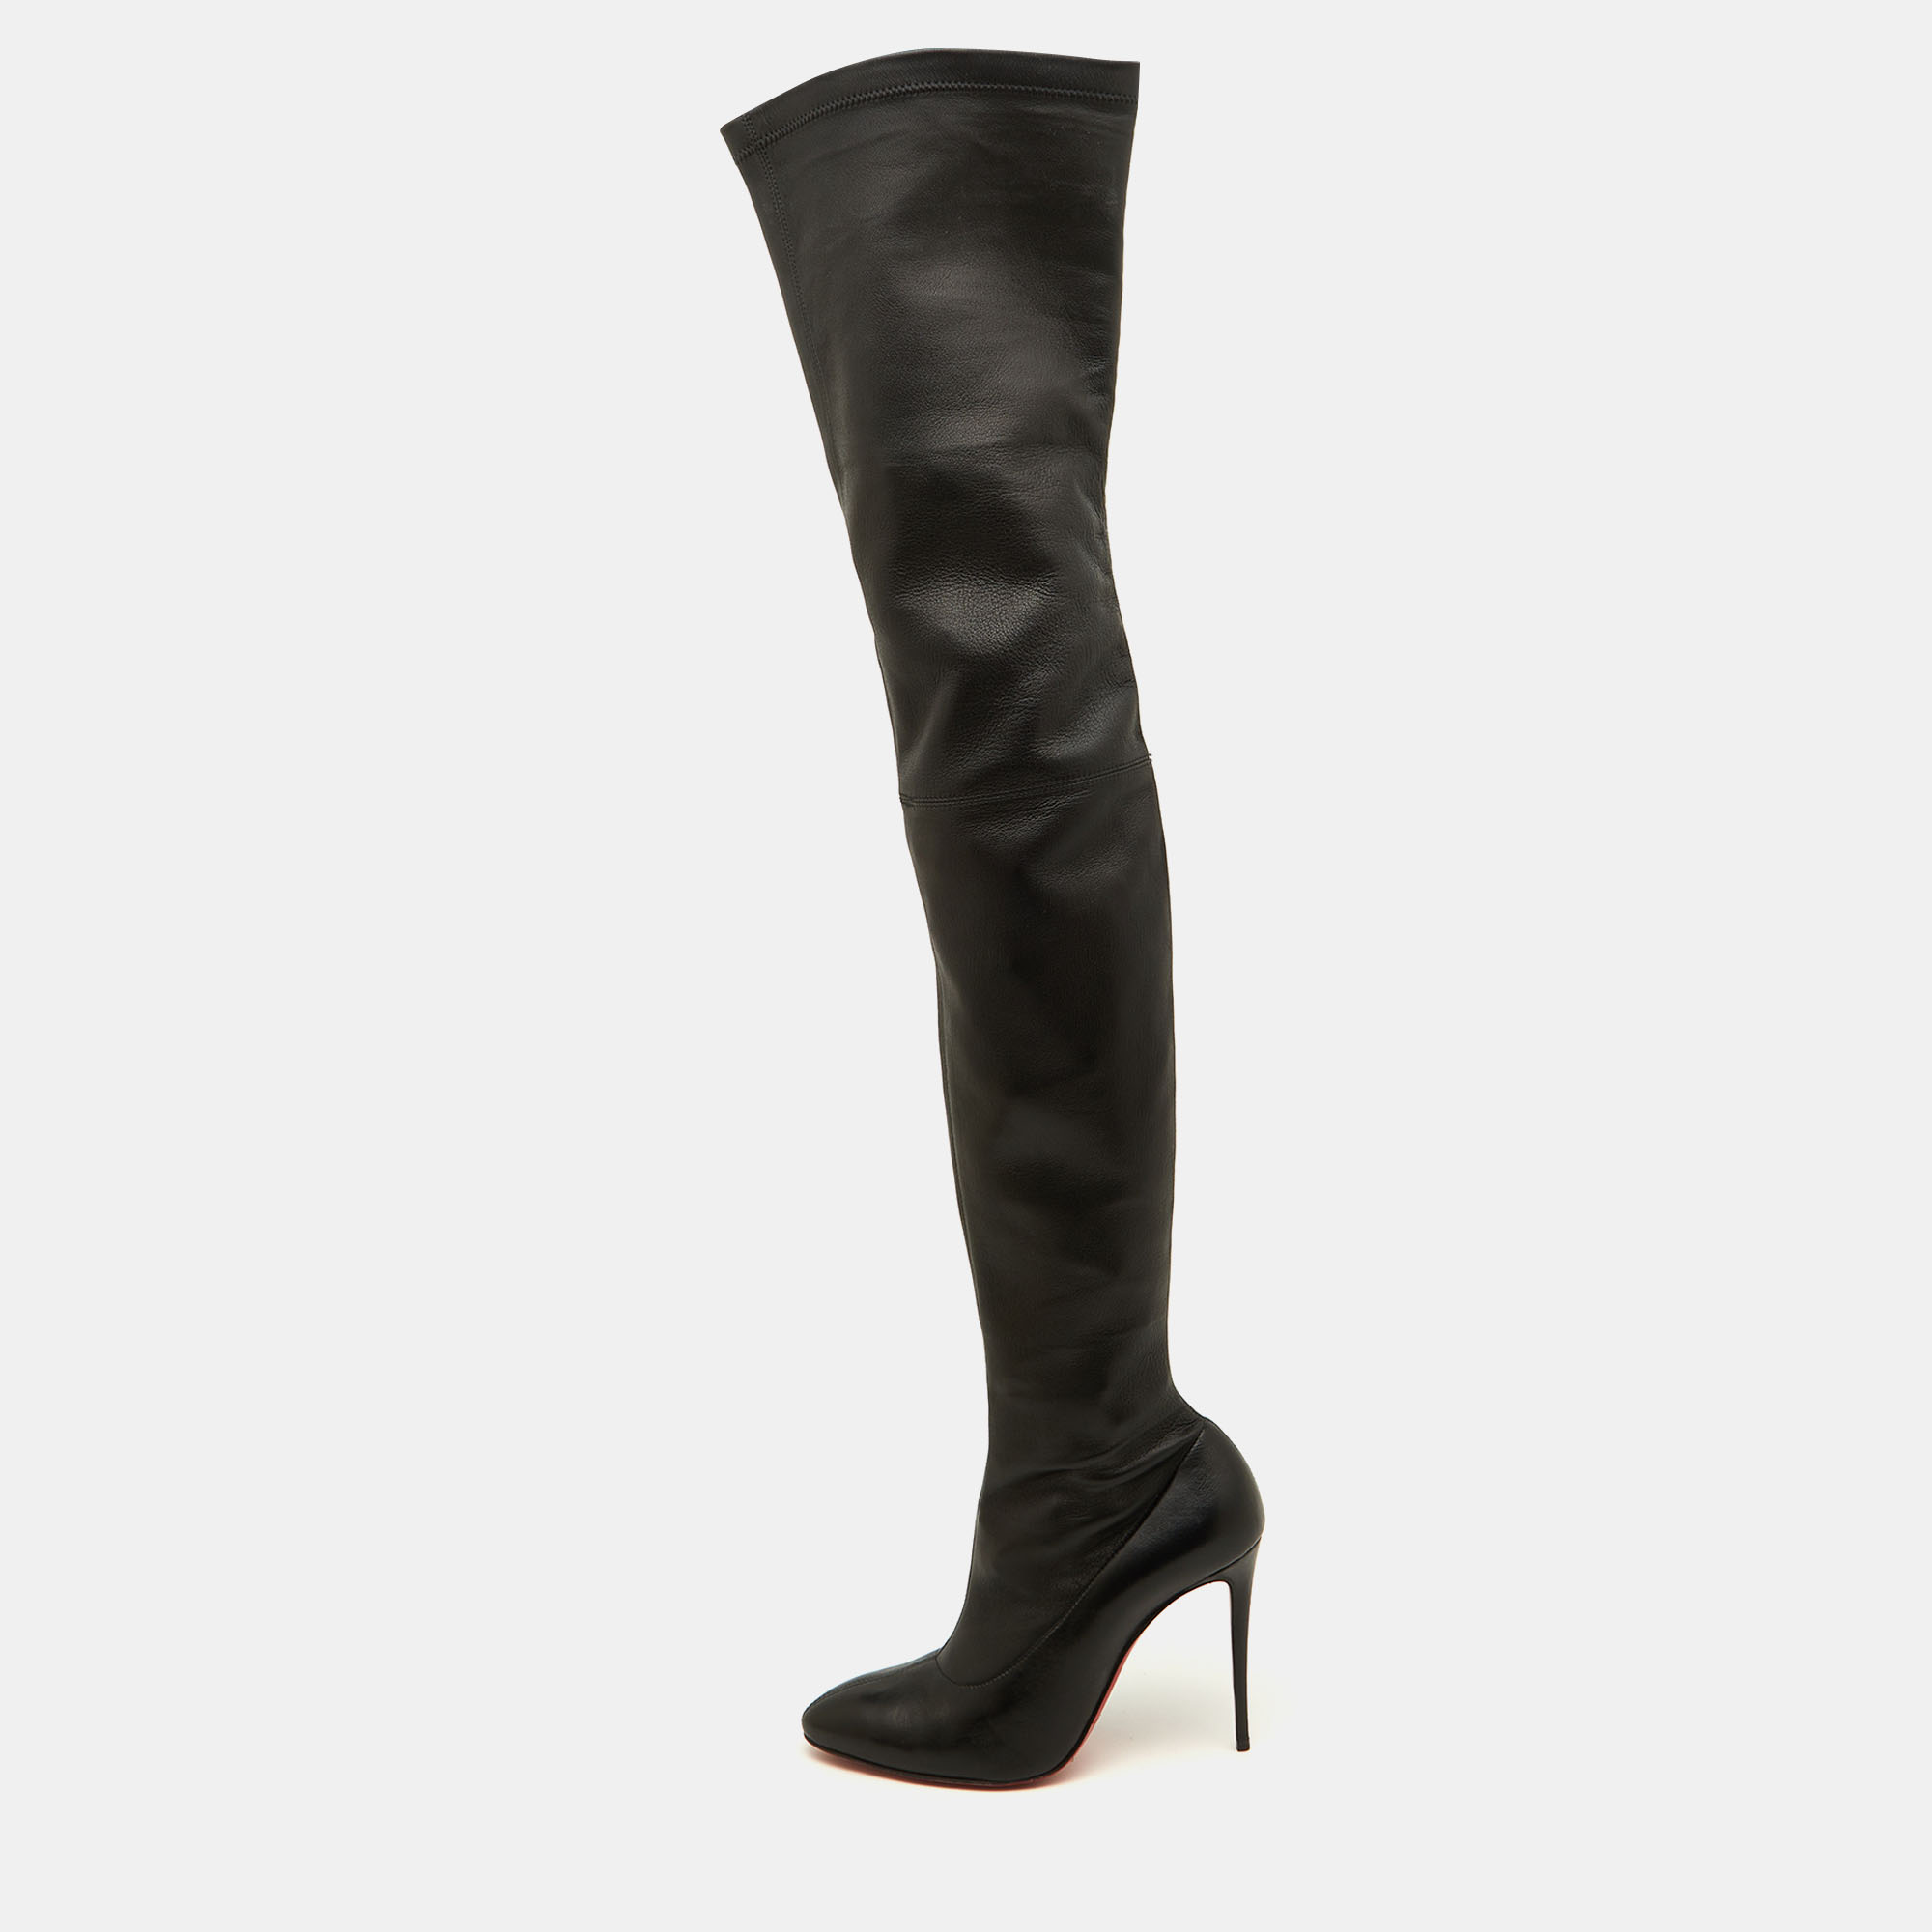 Christian Louboutin Black Leather Thigh High Boots Size 38